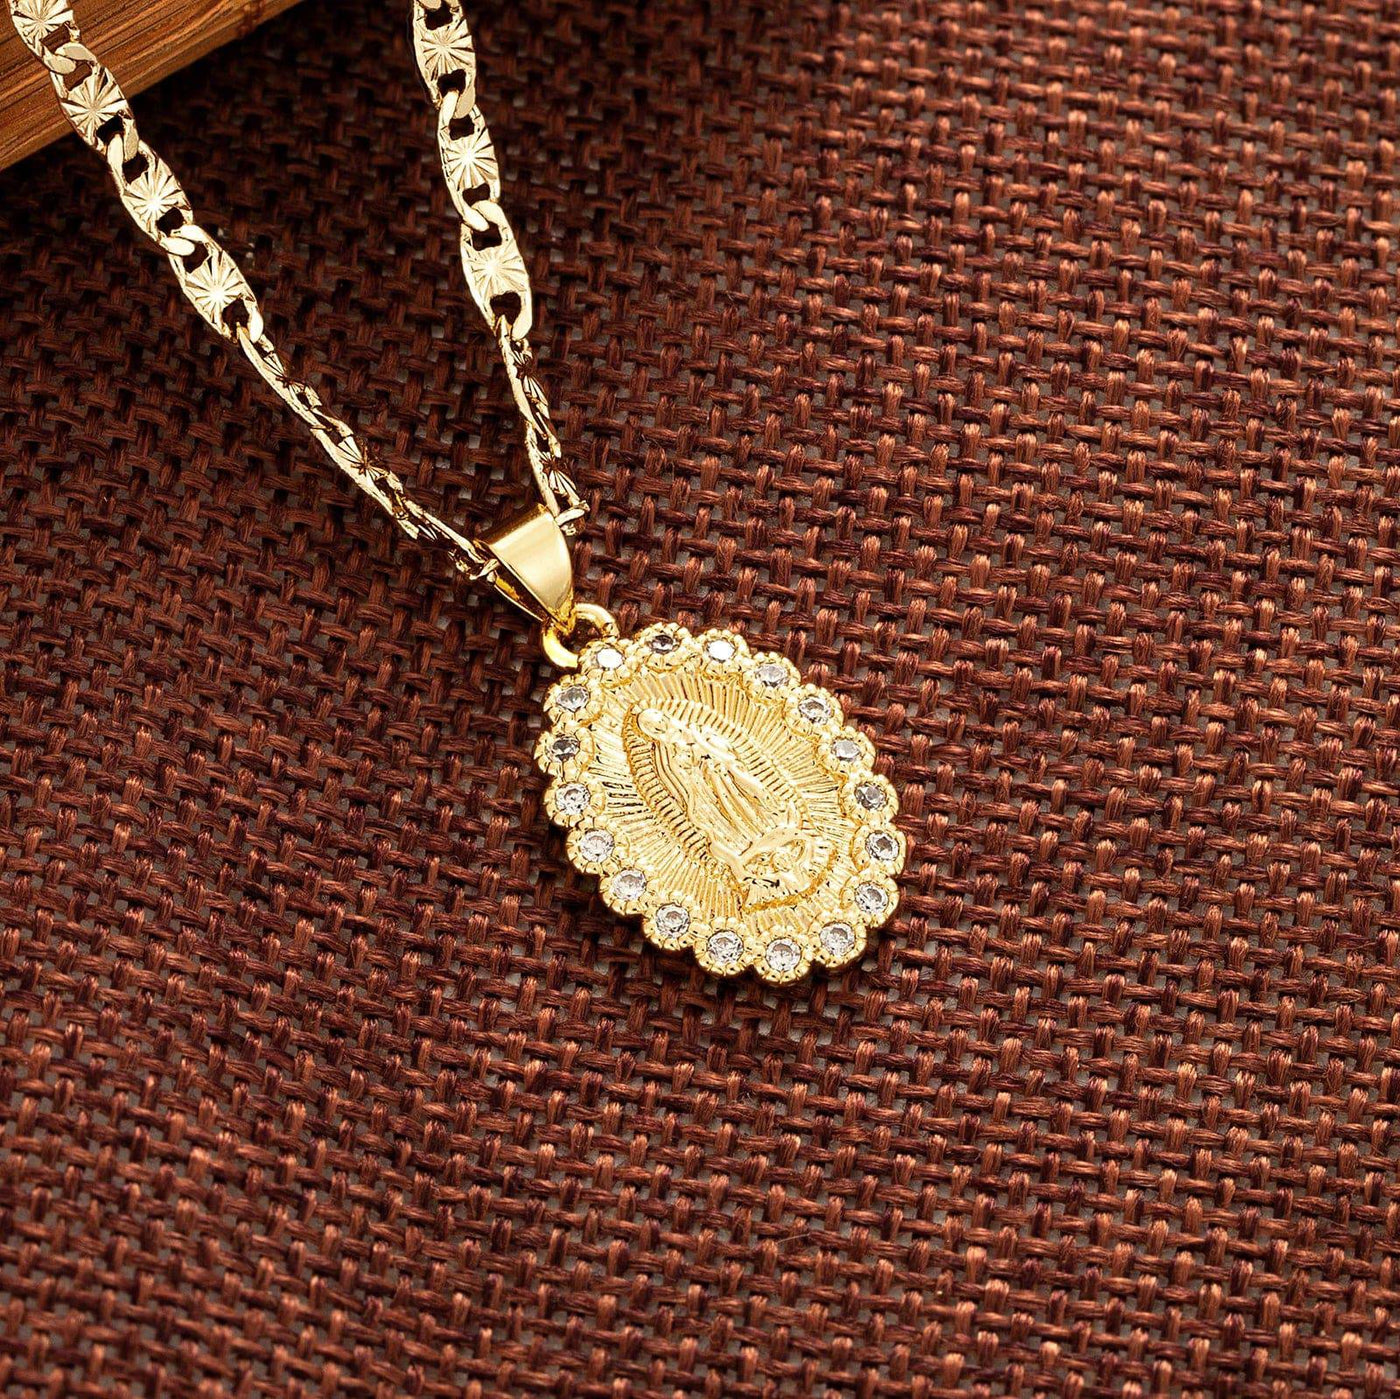 Mini Virgen Mary CZ 14K Gold Plated Necklace - Luxe & Co. Jewelry